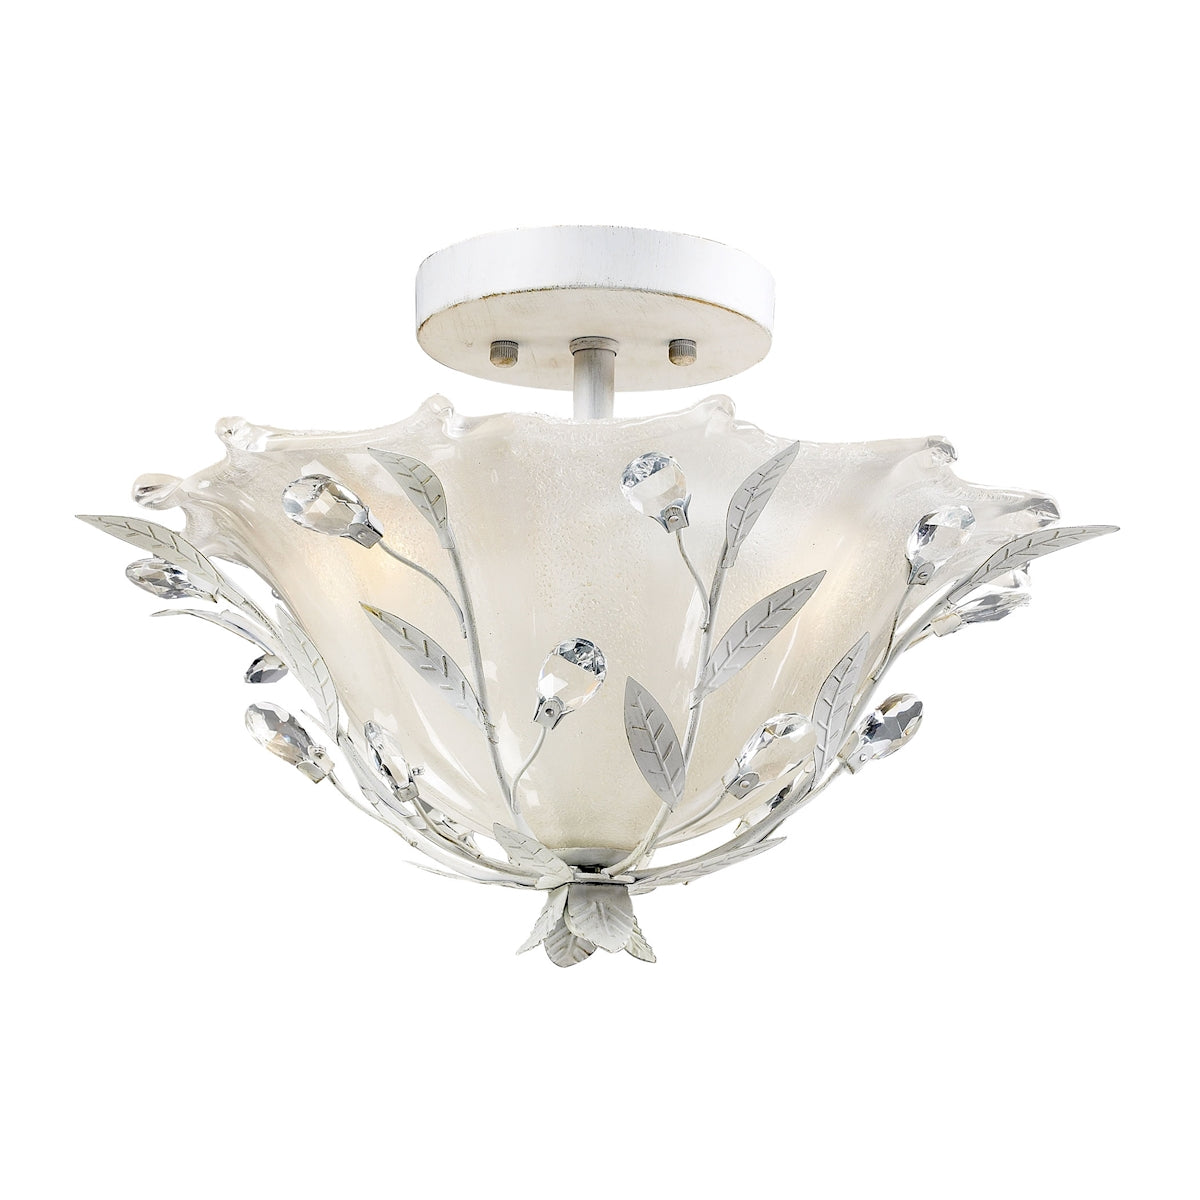 ELK Lighting 18111/2 Circeo 2-Light Semi Flush in Antique White with Crystal and White Shade